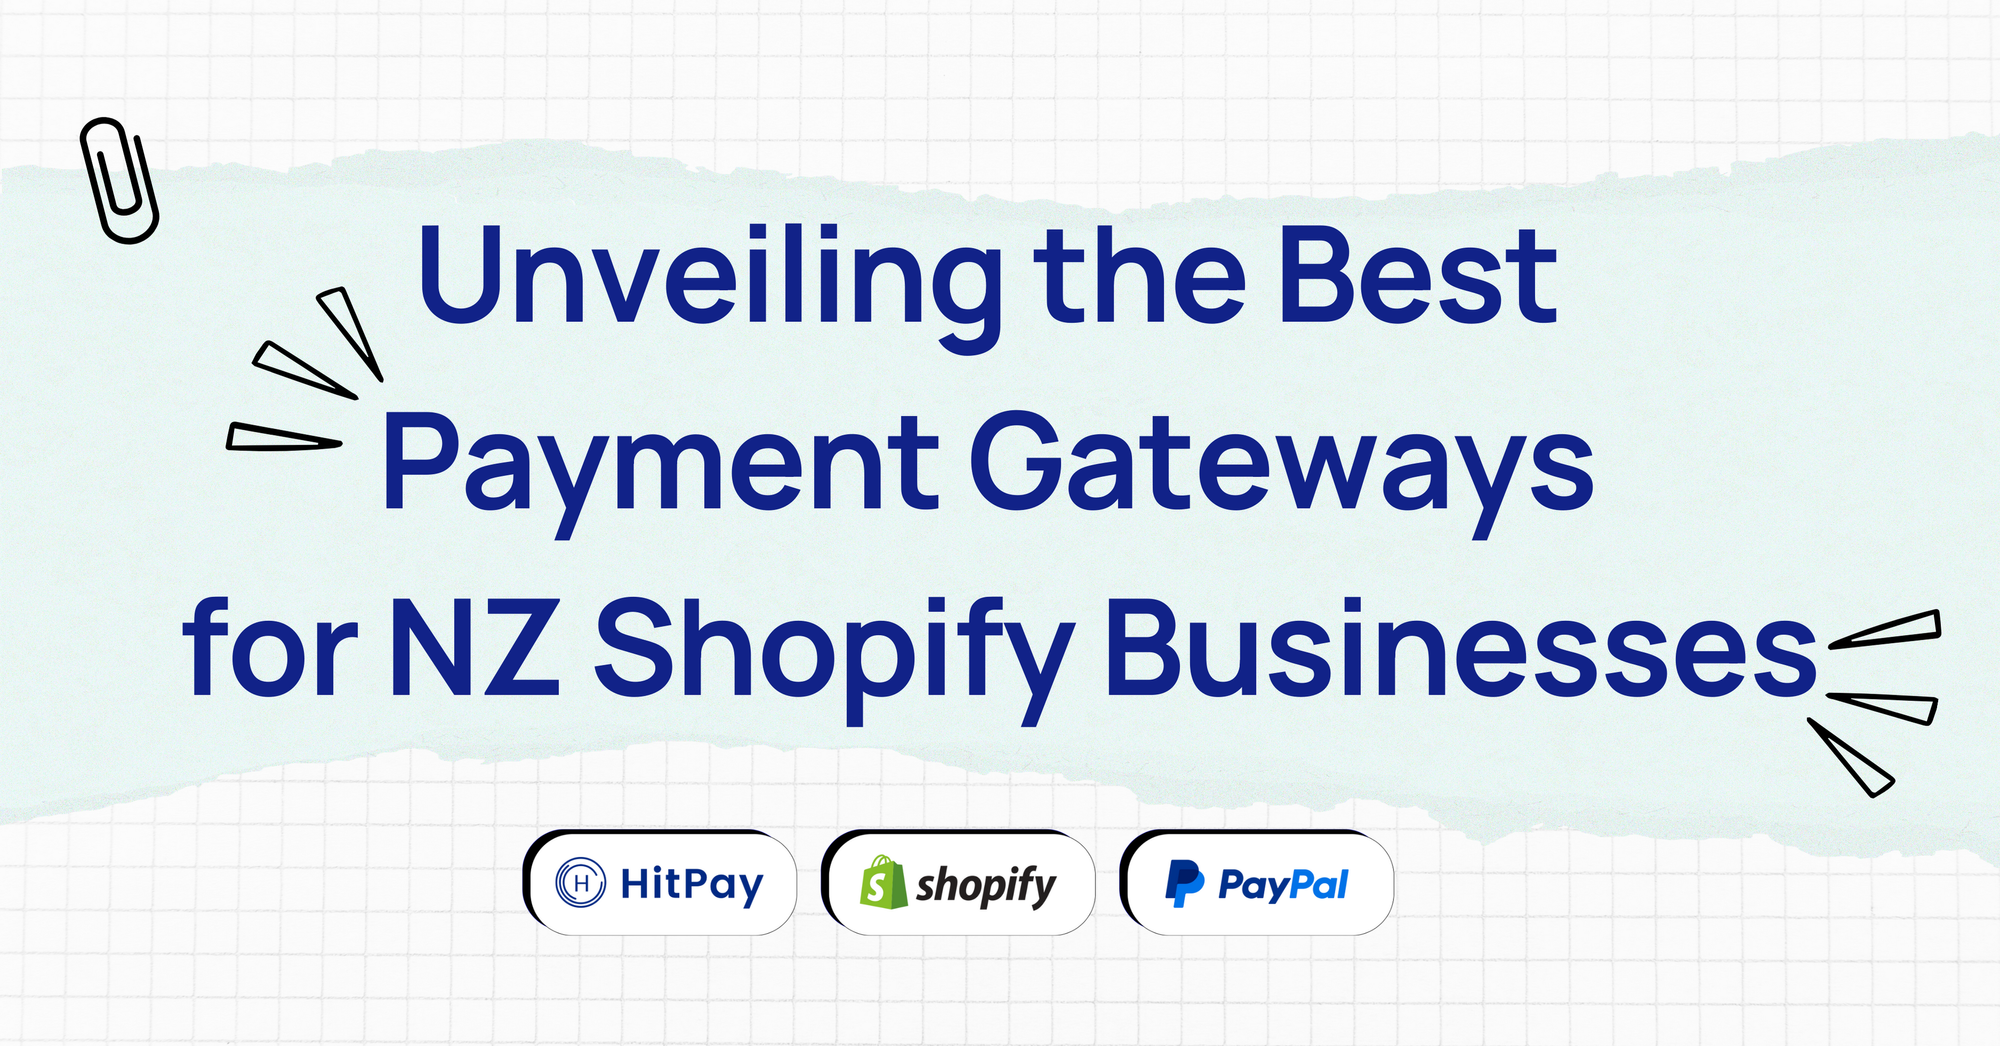 Unveiling the Best Payment Gateways for NZ Shopify Businesses: HitPay, Shopify Payments, and PayPal Compared